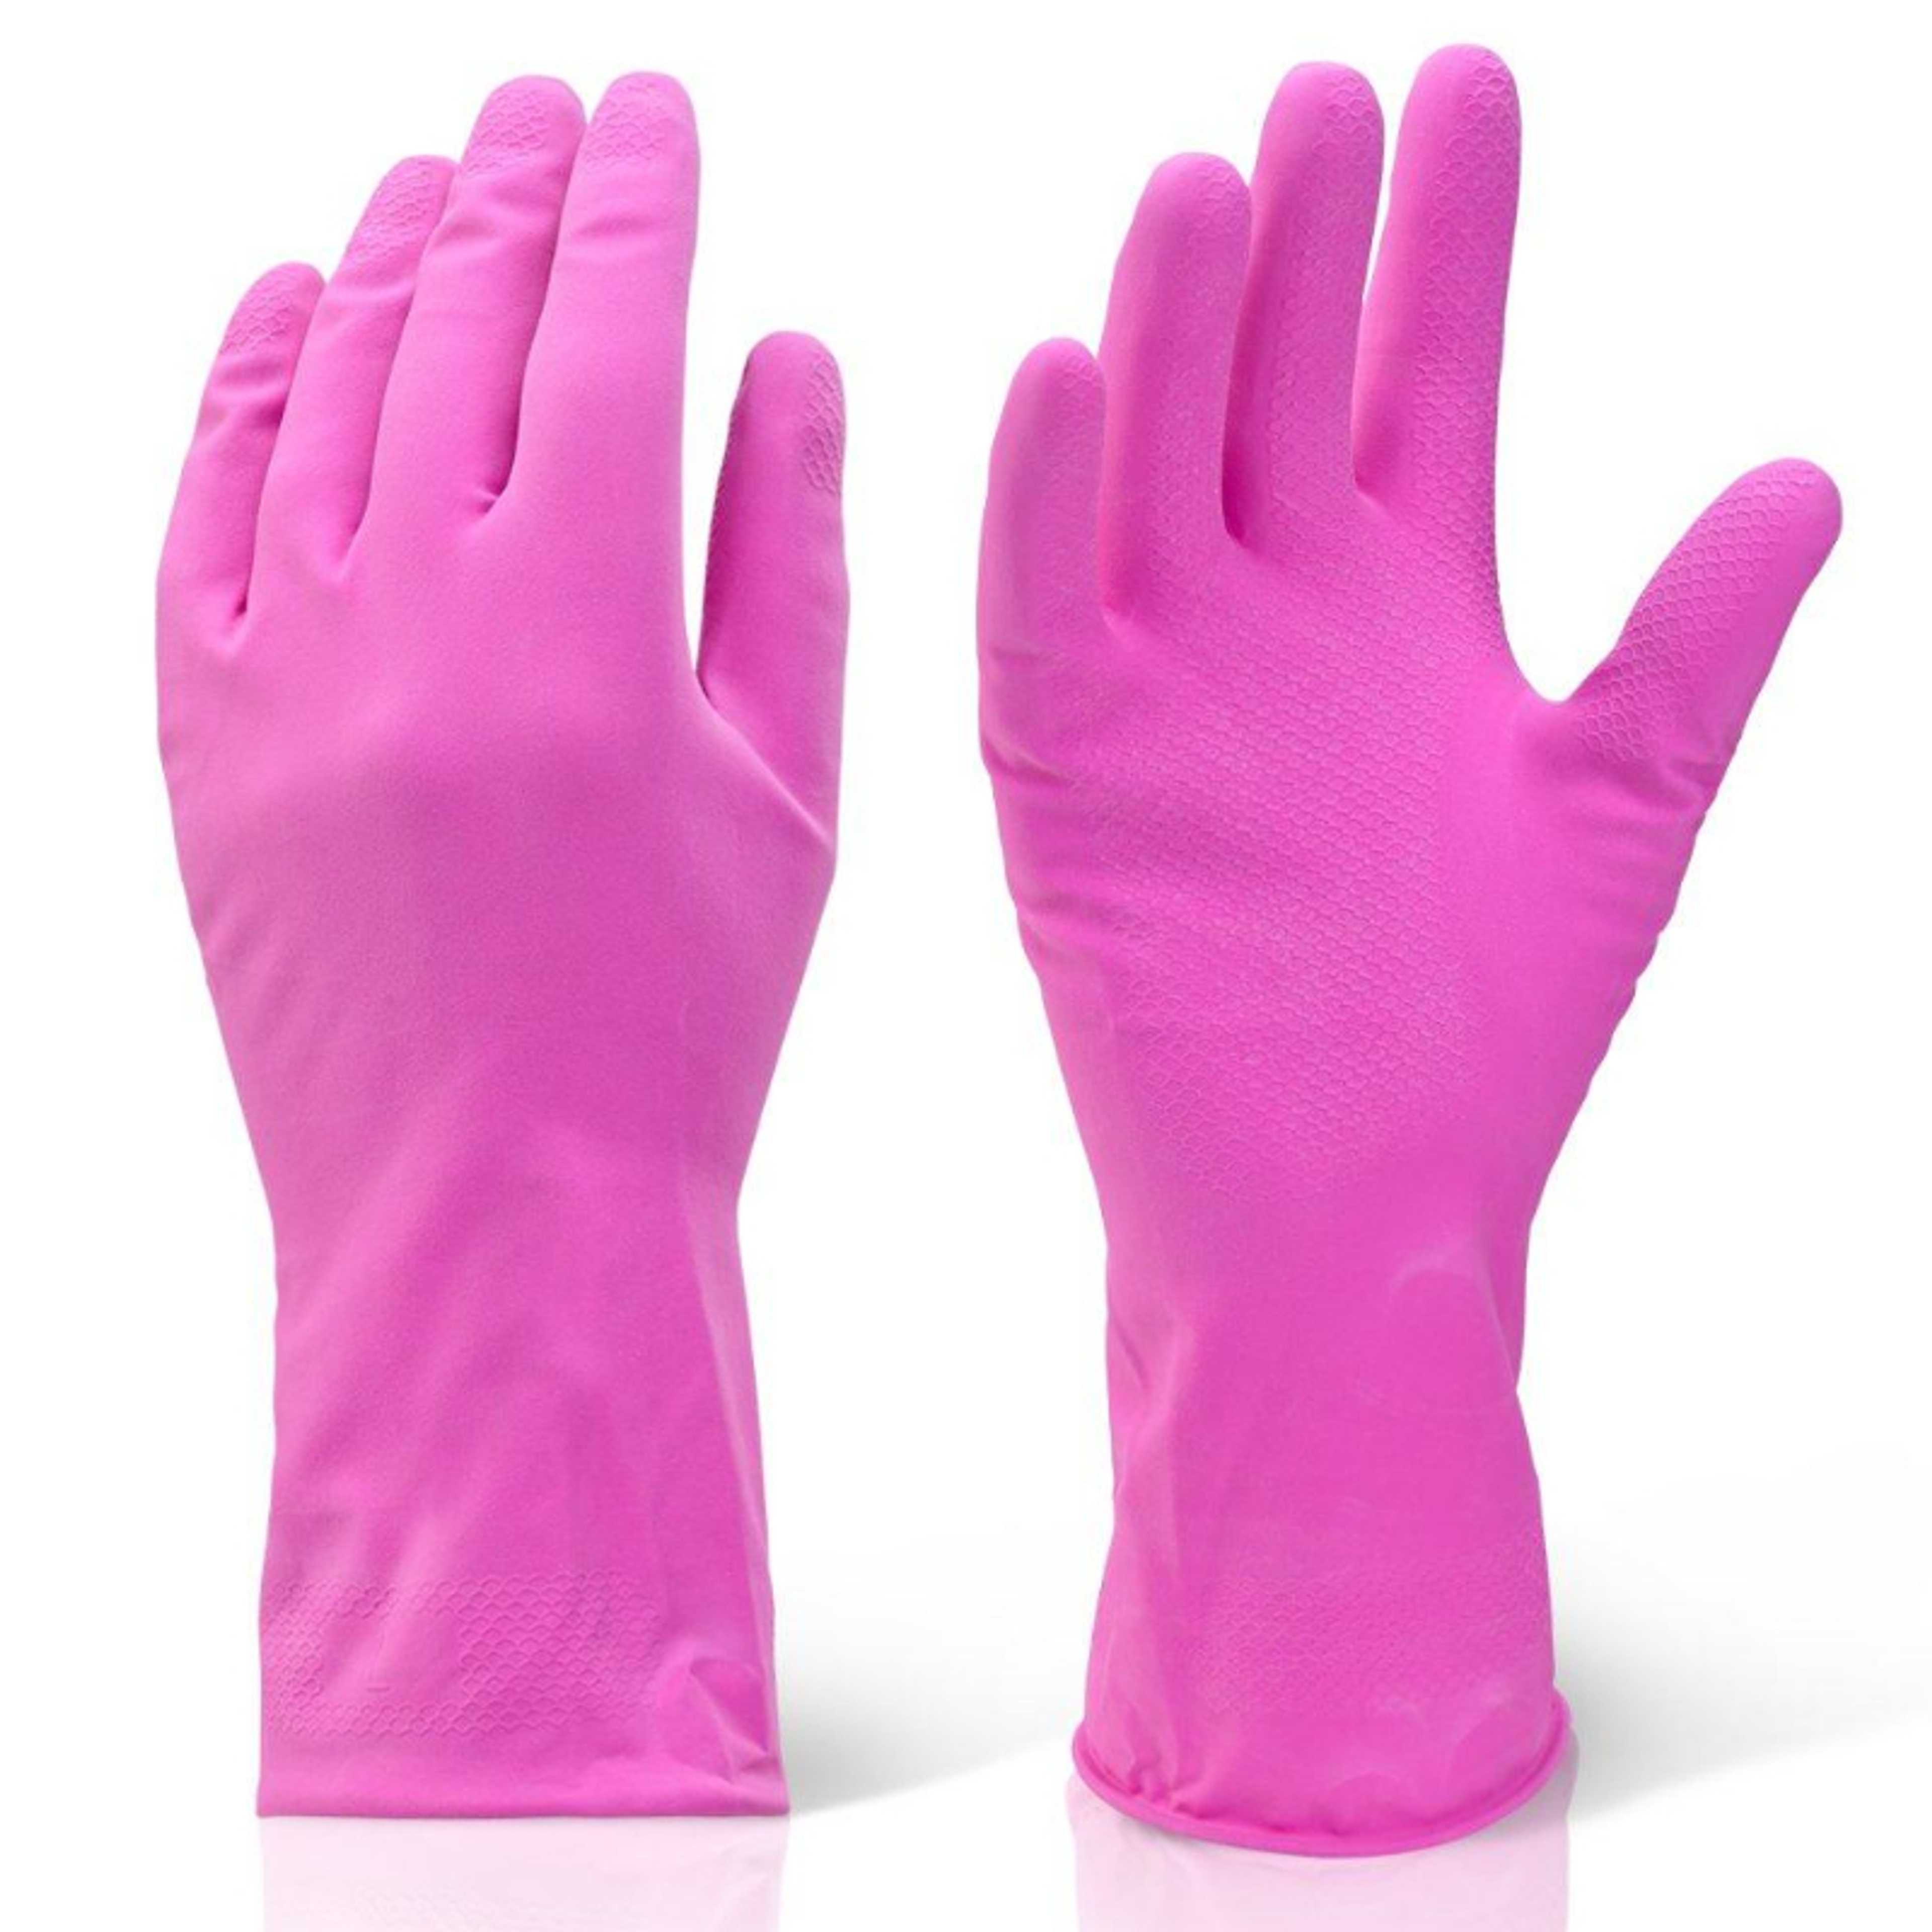 NDM Rubber Gloves for cleaning Rubber Washing Gloves for Wash Dish,Kitchen, Bathroom